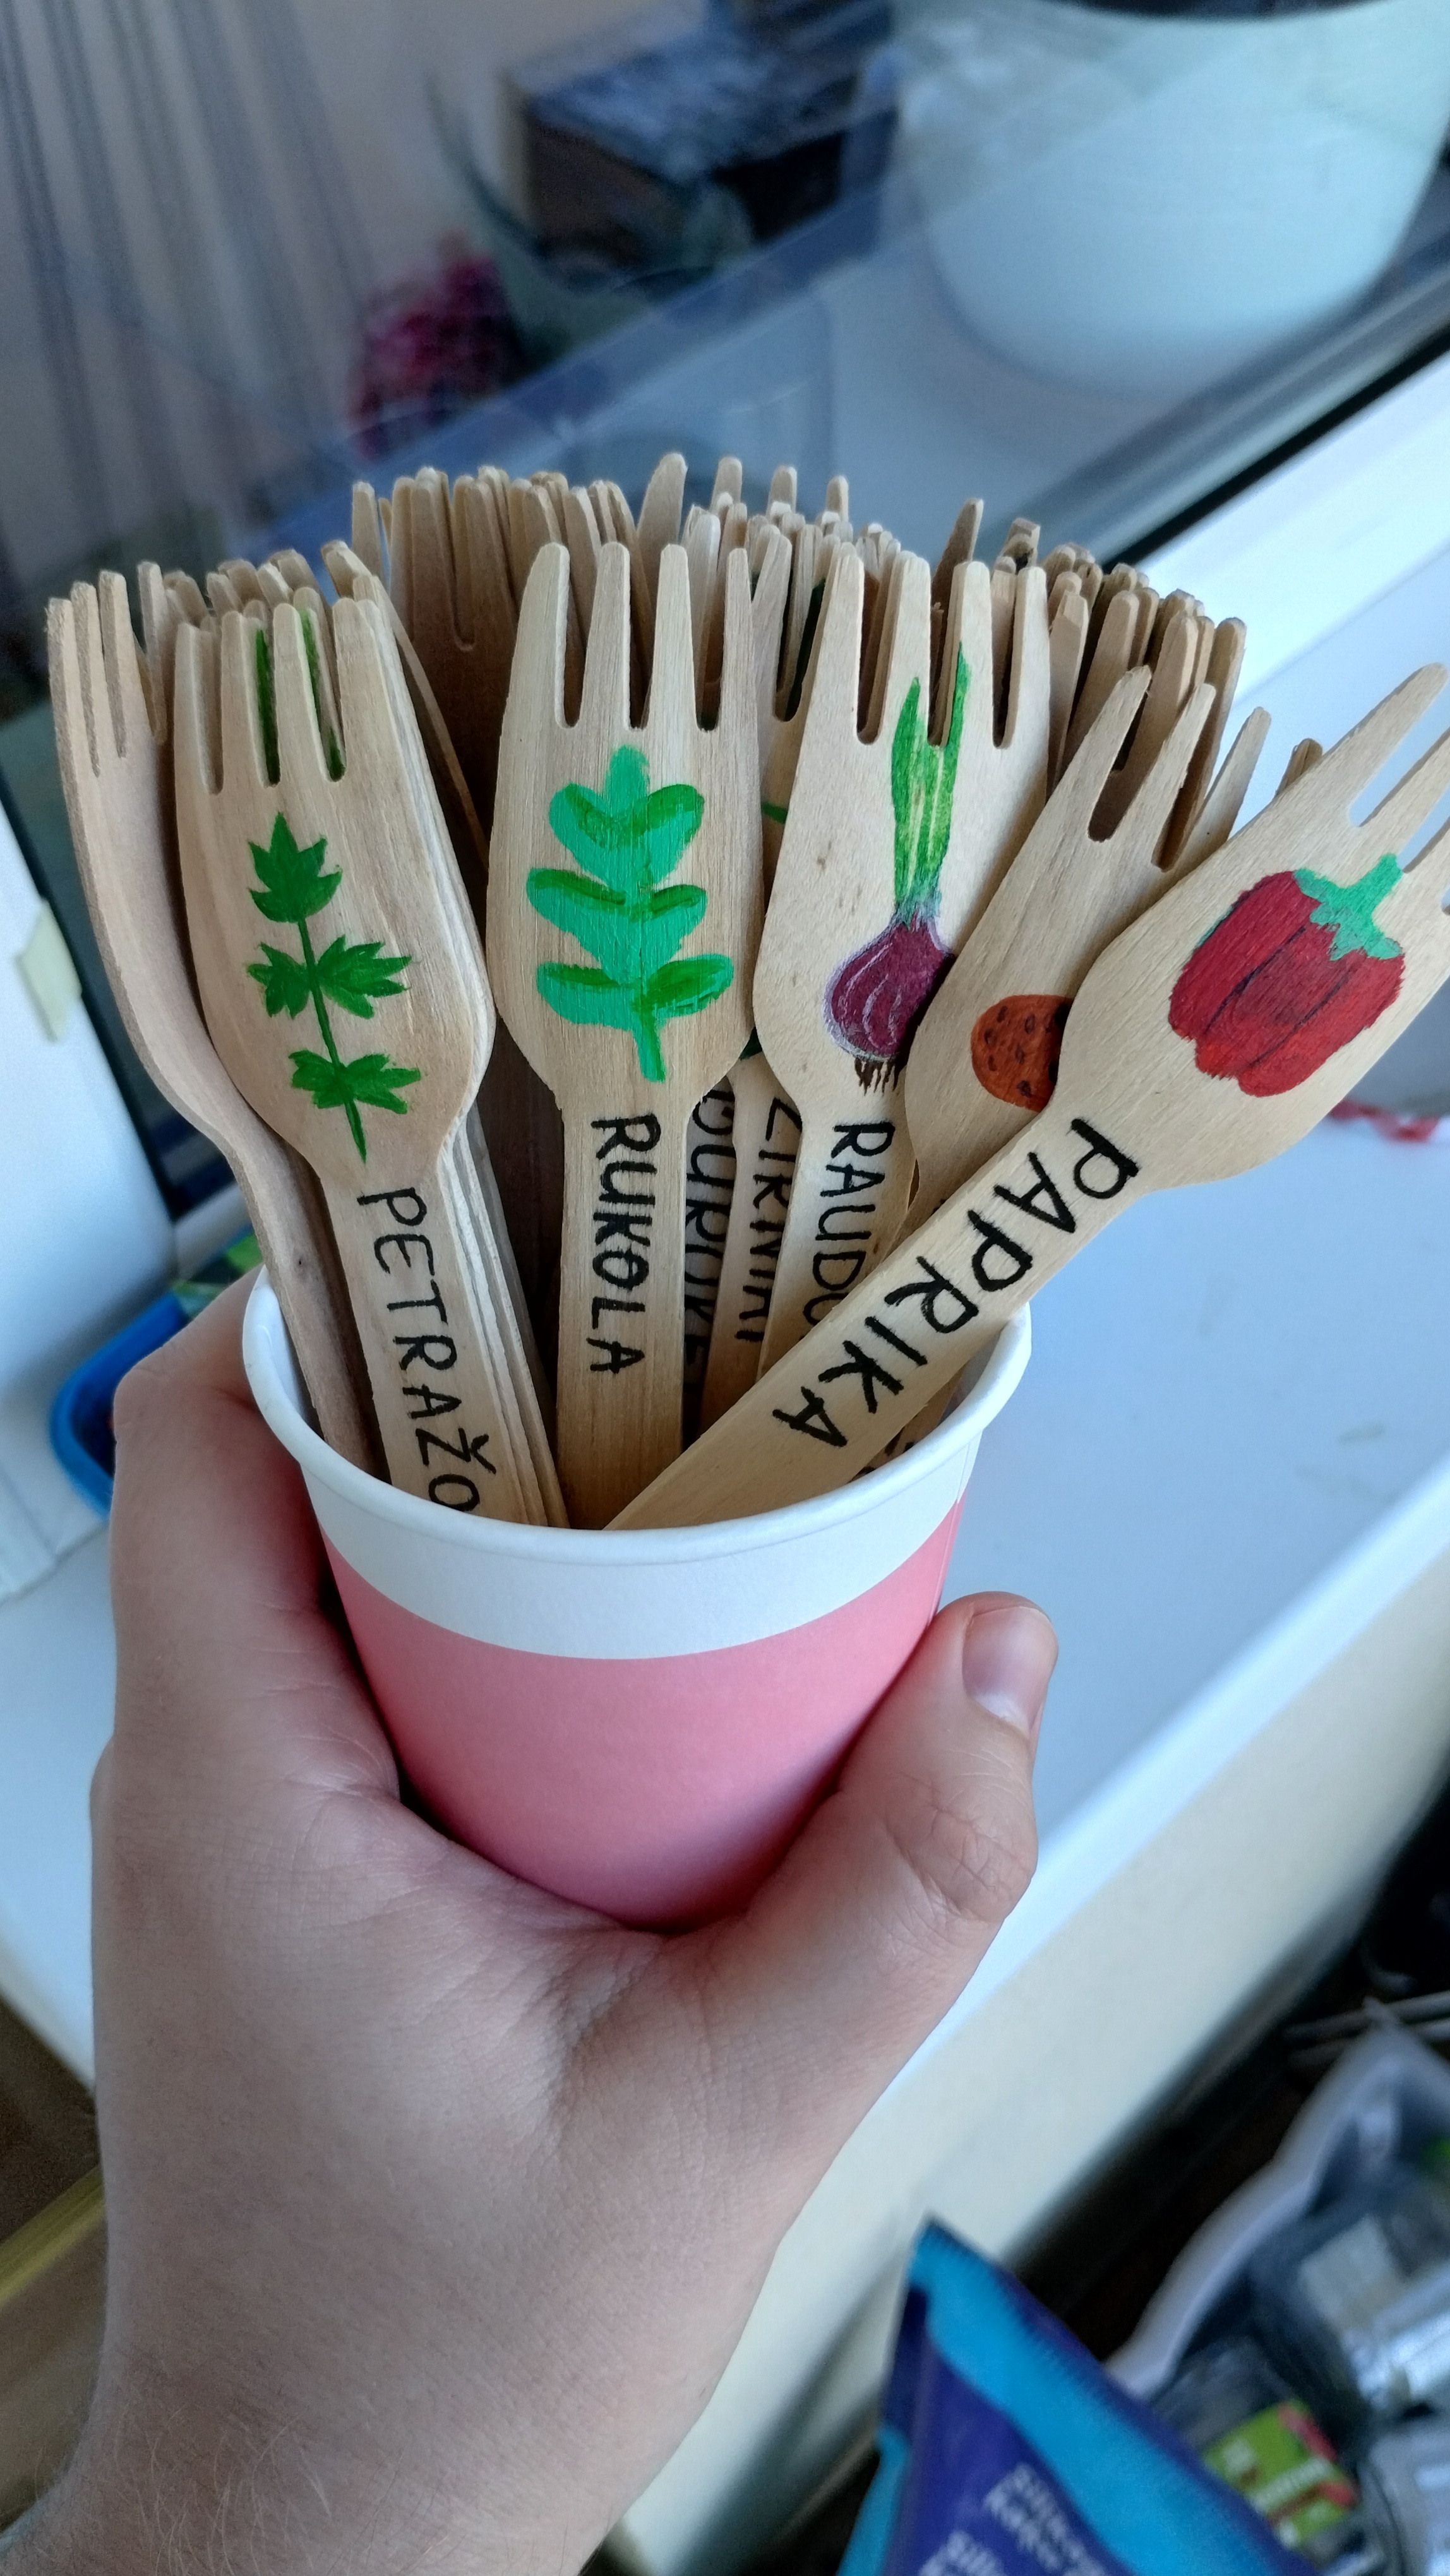 A cup of sporks with vegetable names on them